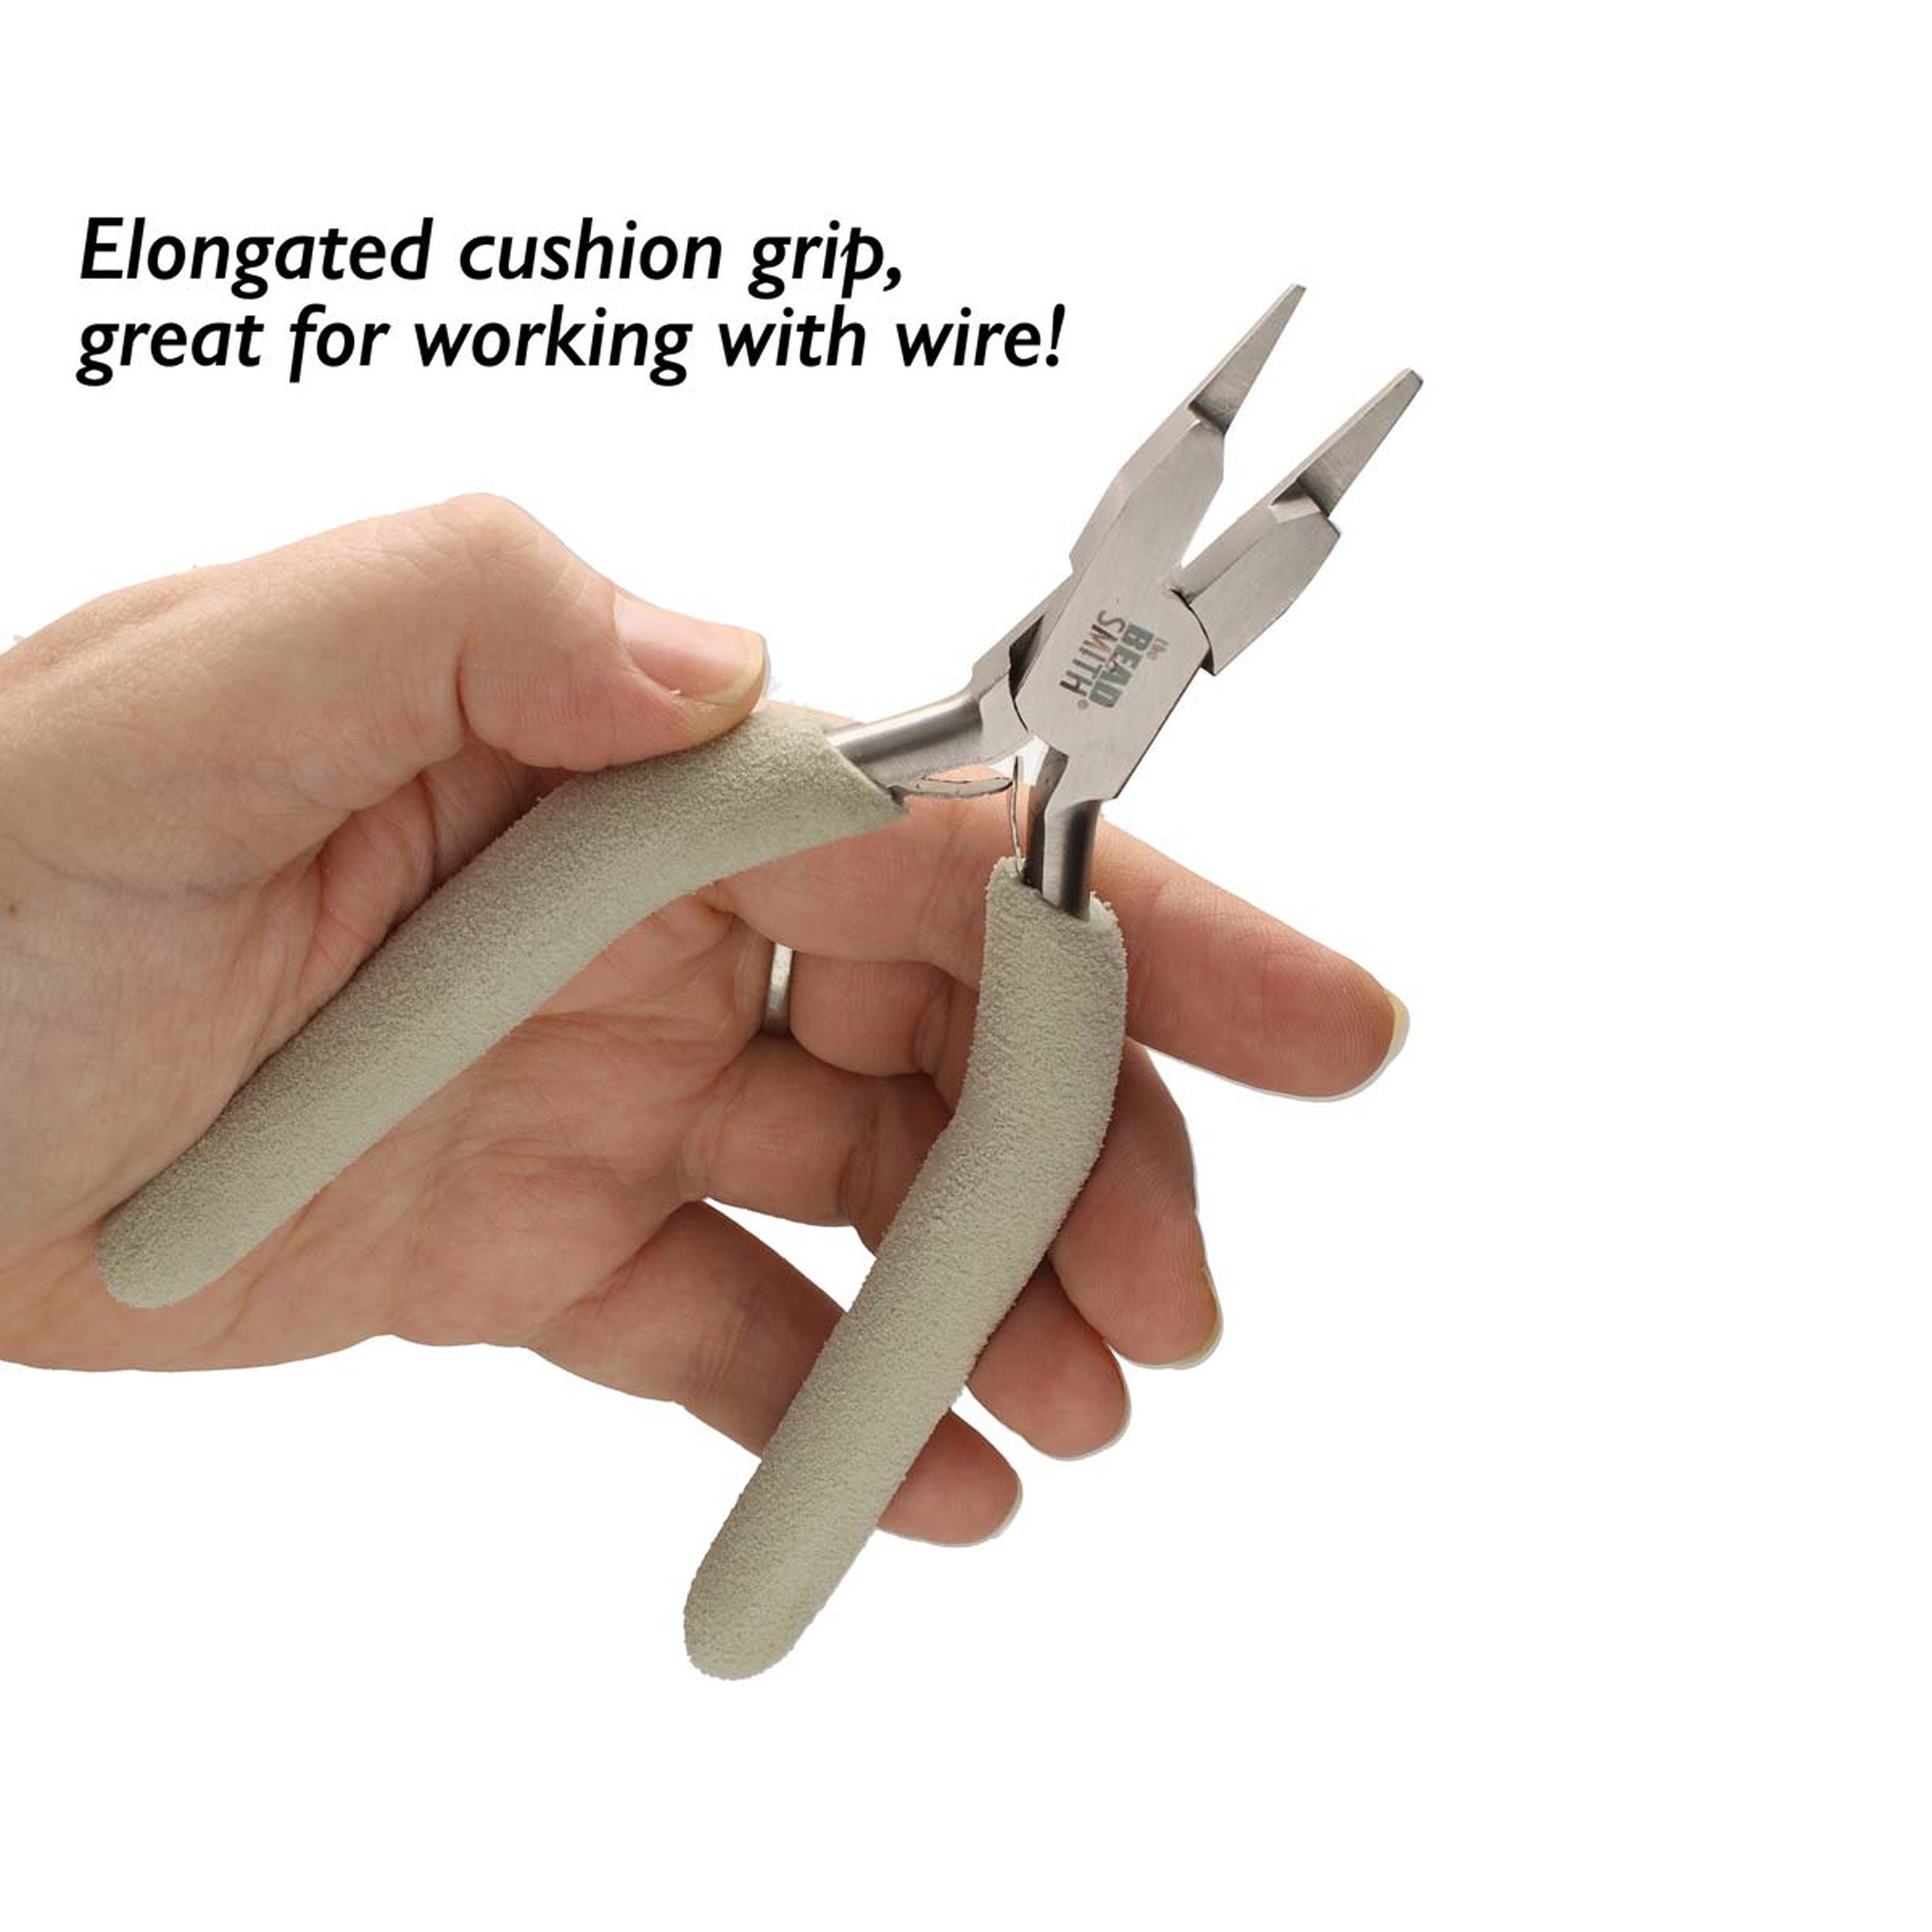 Wrapmaker Pliers, Jewelry Making Tools, Ergonomic Cushion Grip, Box Joint,  Return Spring Action, Wire Elements by Beadsmith, PLWE305 